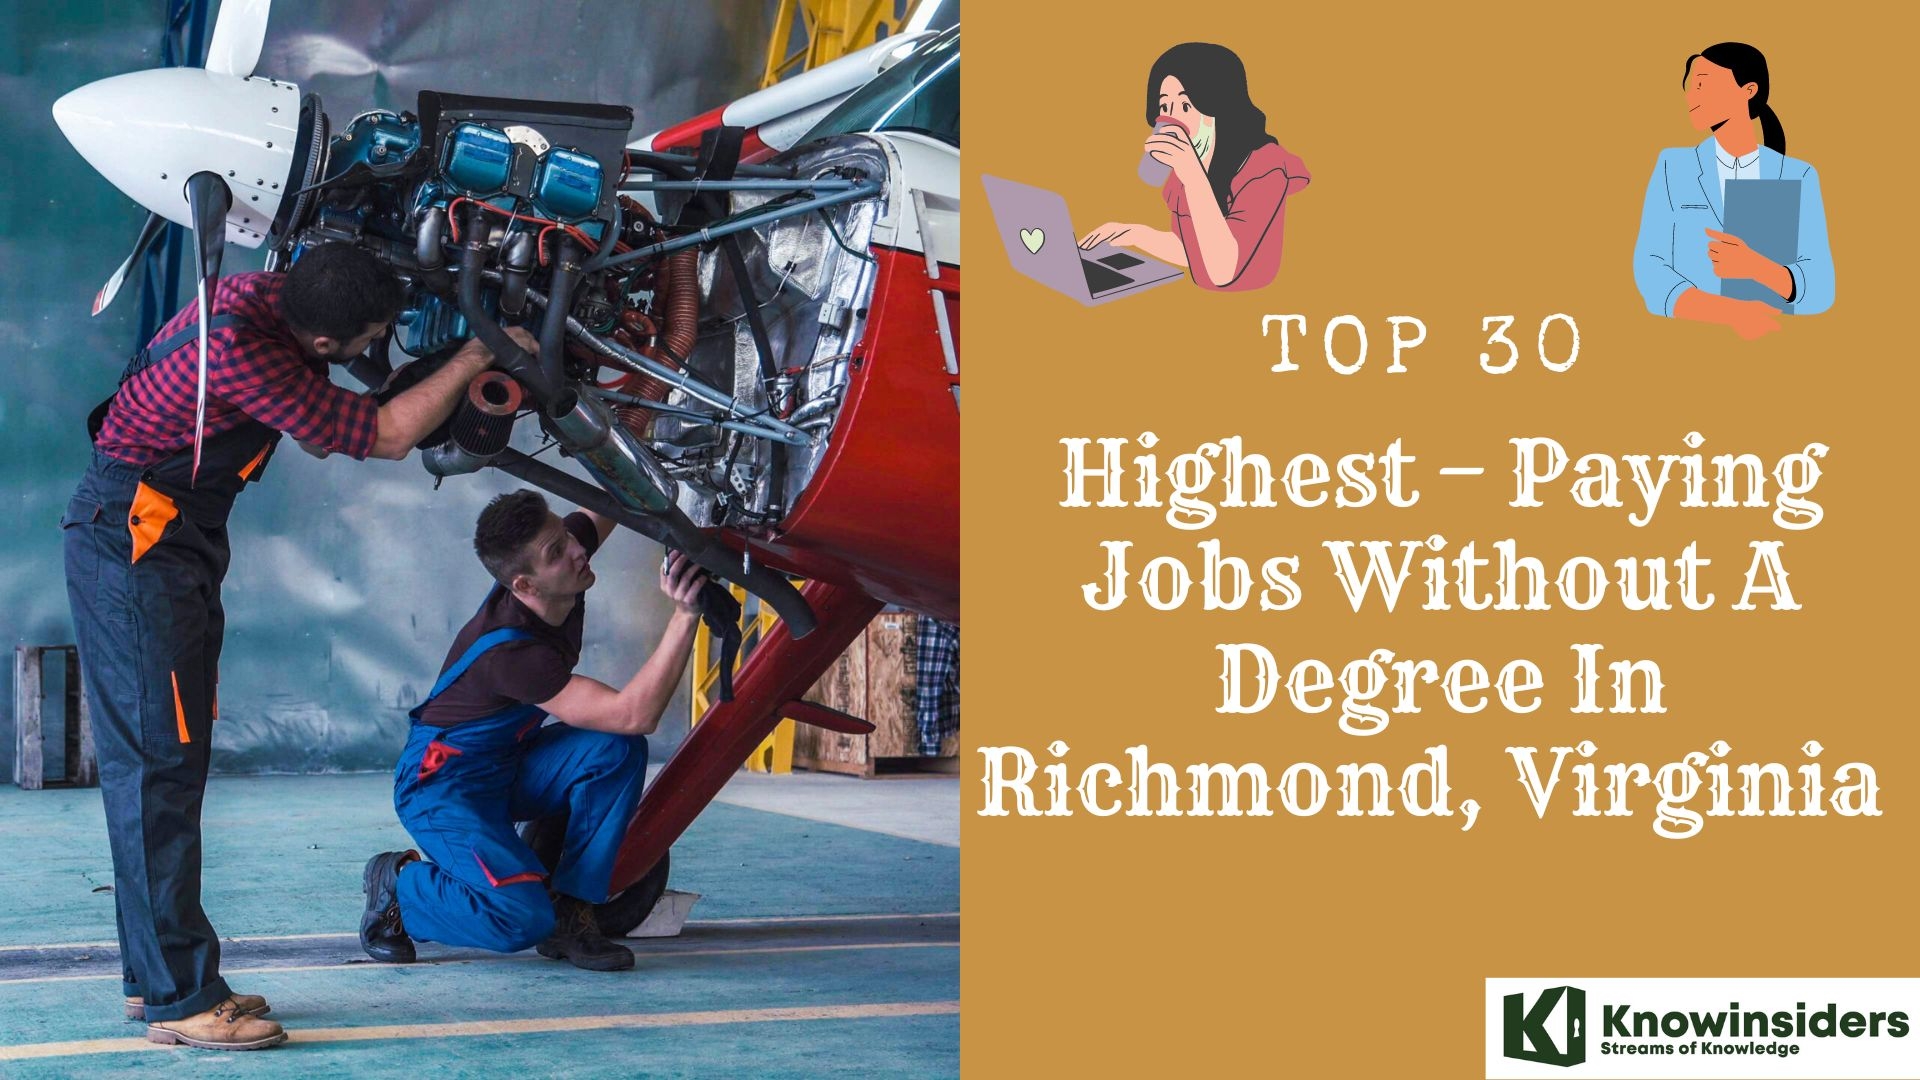 Top 30 Highest – Paying Jobs Without A Degree In Richmond, Virginia 